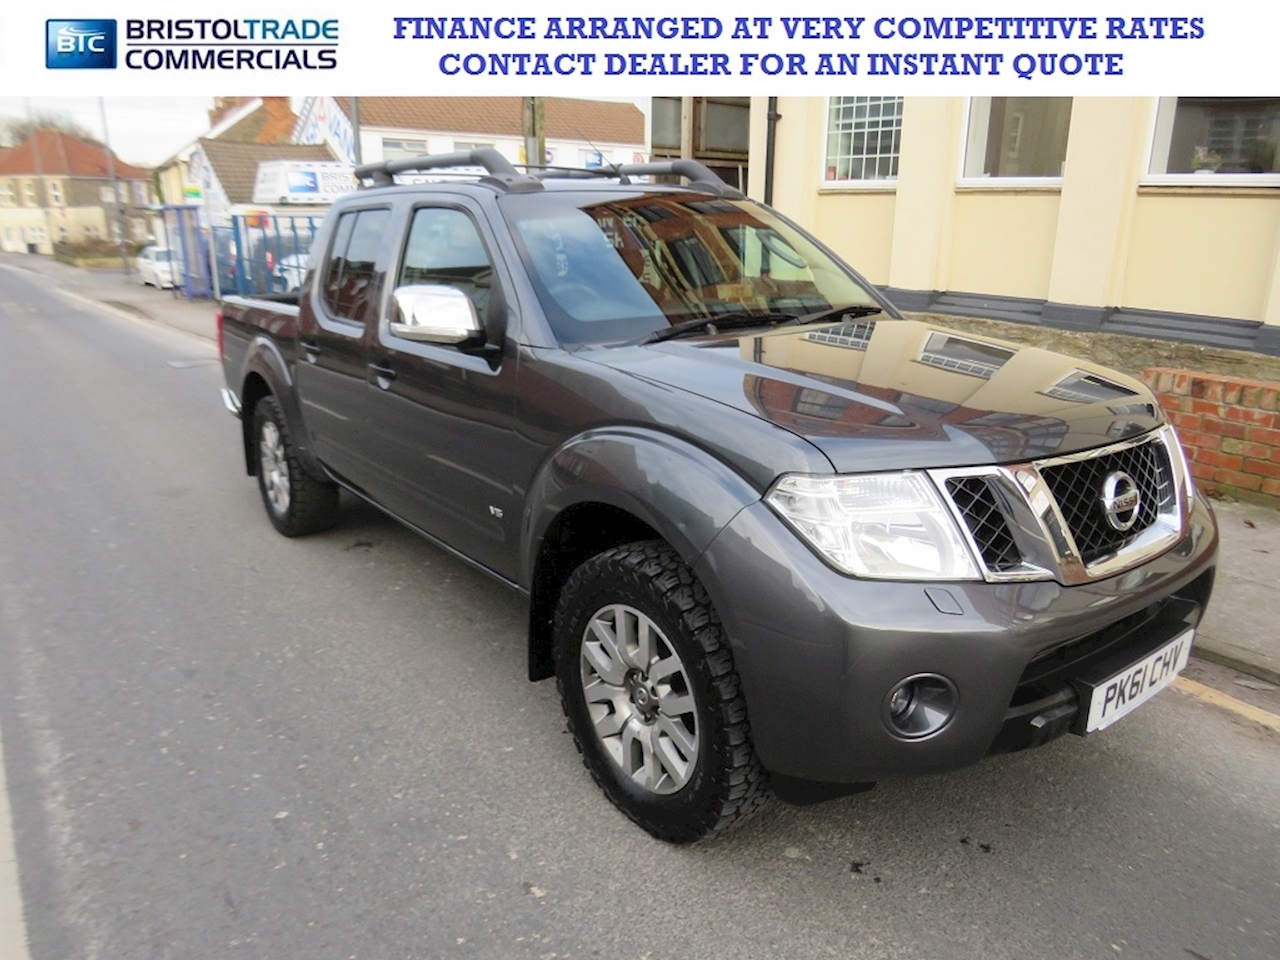 Navara 3.0 dCi V6 Outlaw Double Cab Pickup 4dr